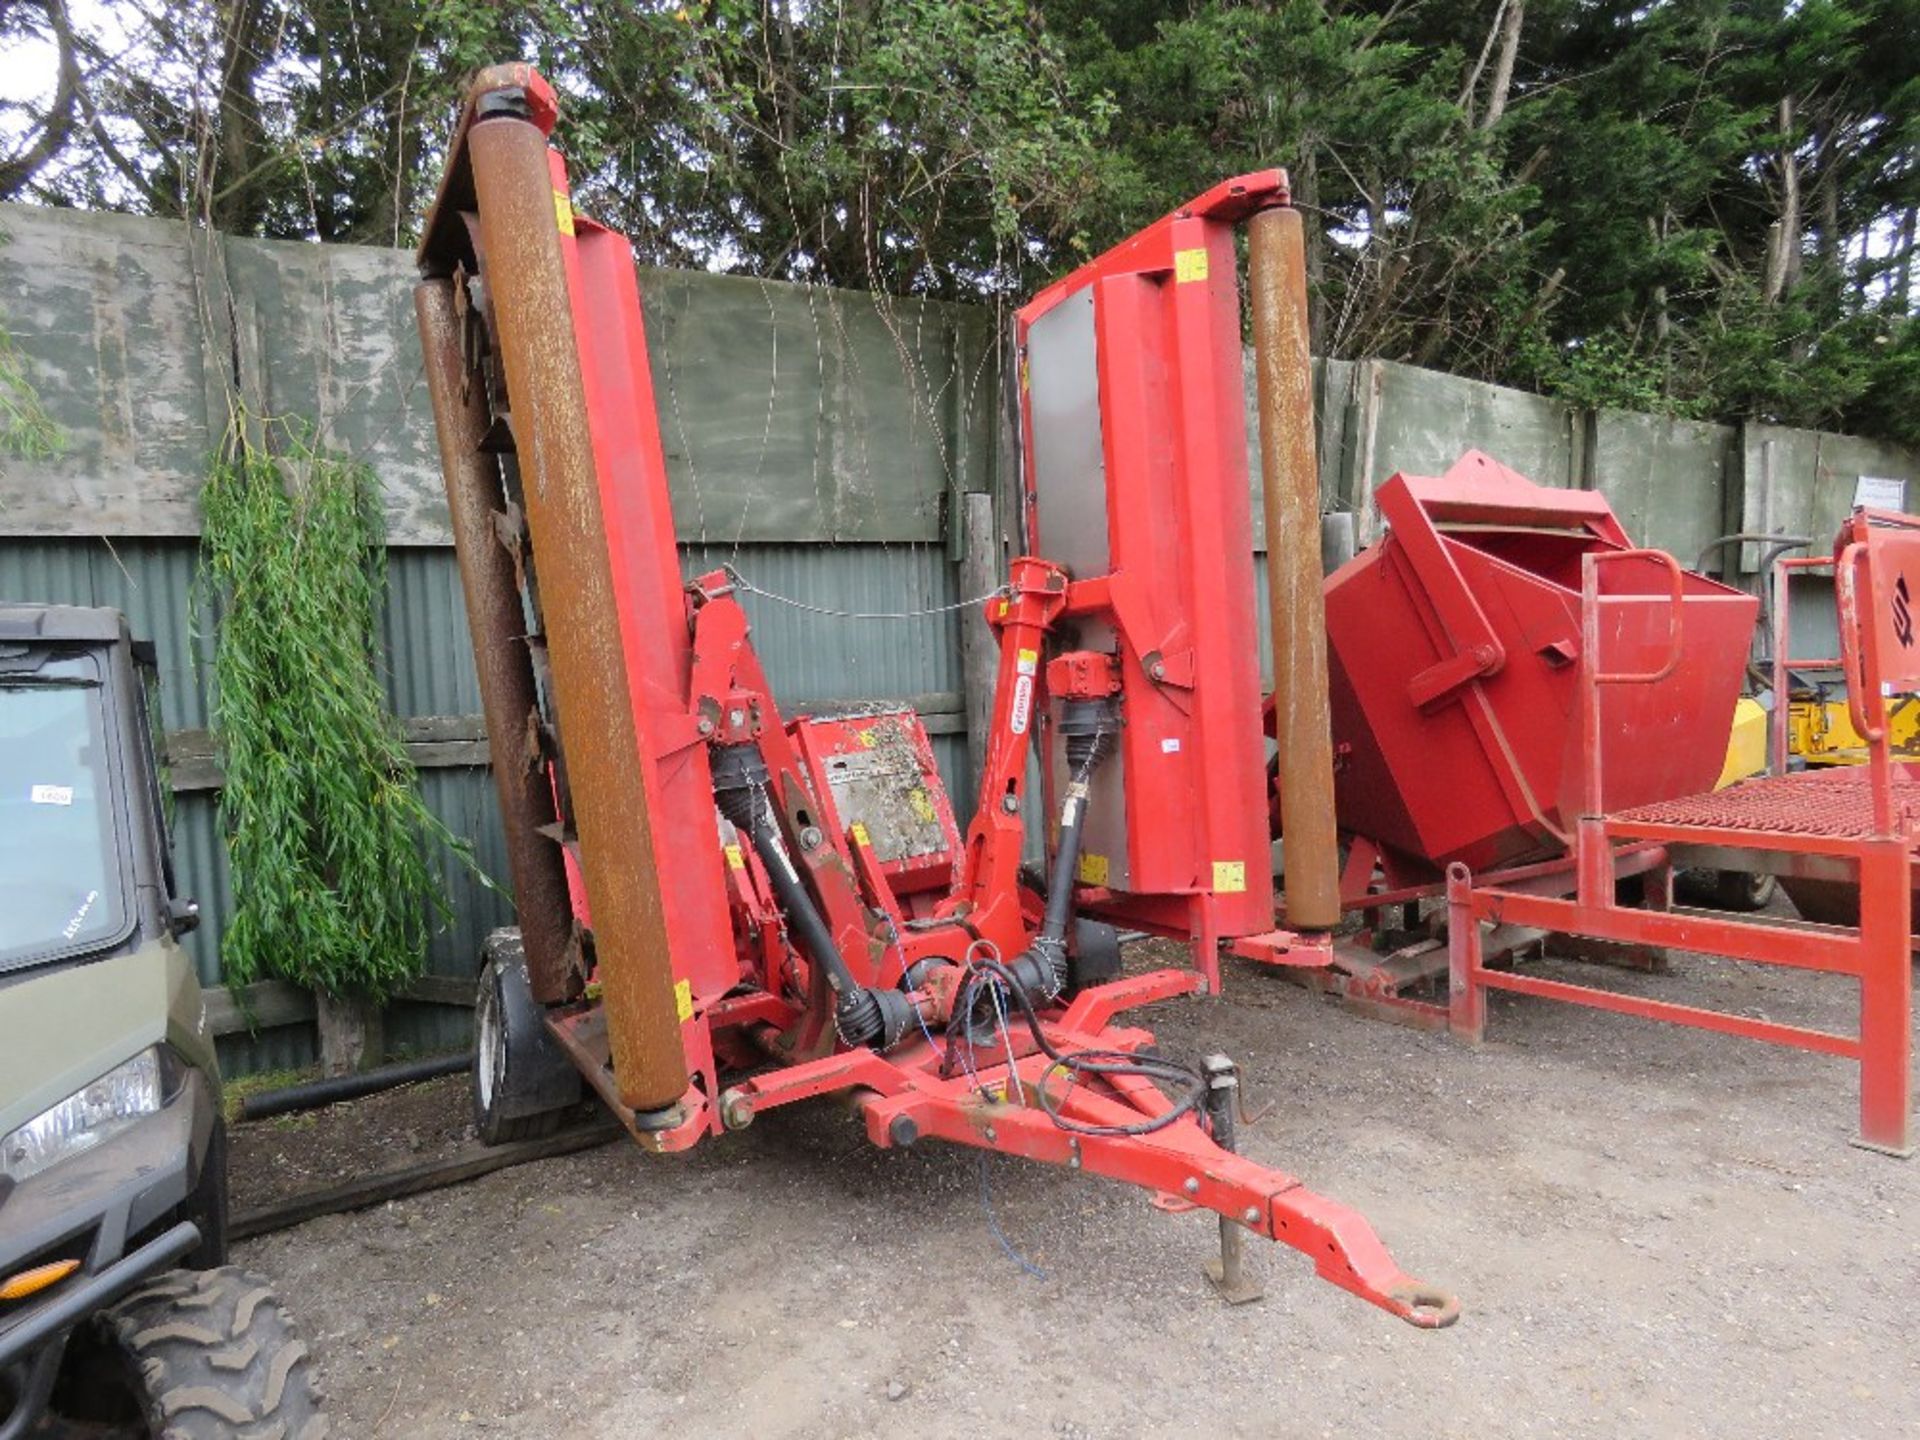 TRIMAX 728-610-400 BATWING TYPE ROLLER MOWER, YEAR 2017. PEGASUS S3 HEADS. NB: REQUIRES REPAIR TO CH - Image 2 of 13